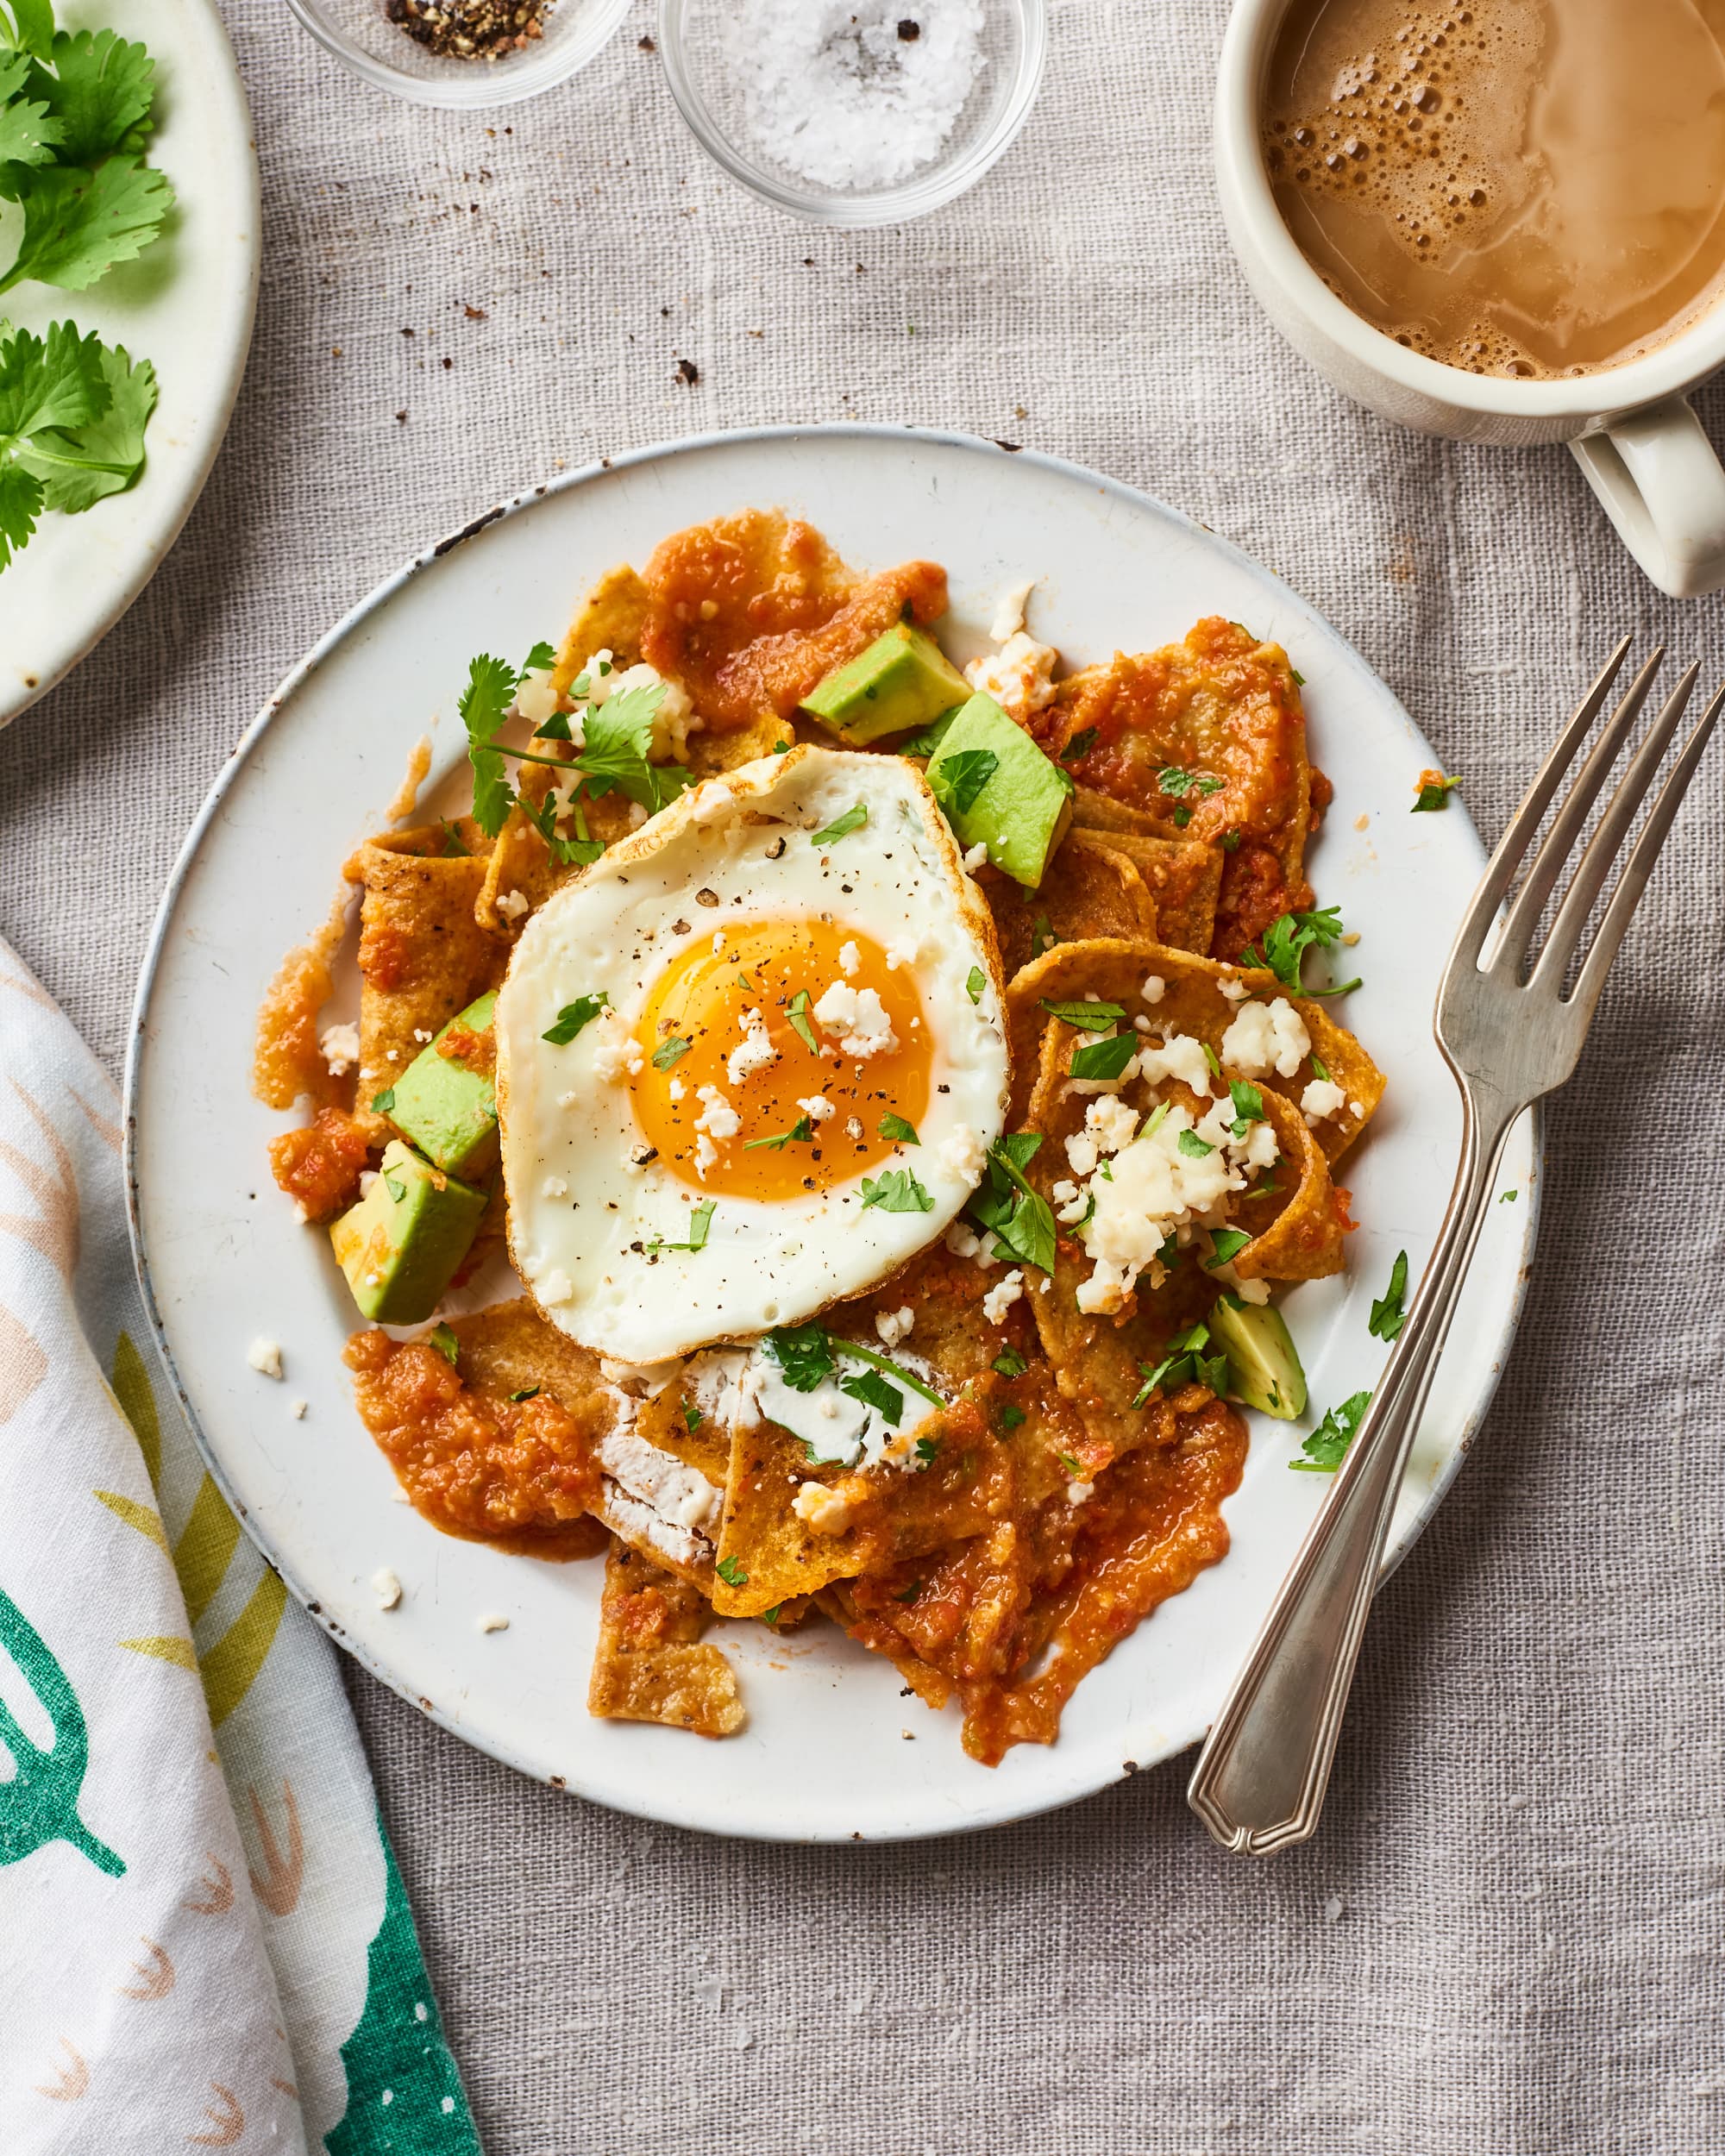 How To Make Chilaquiles